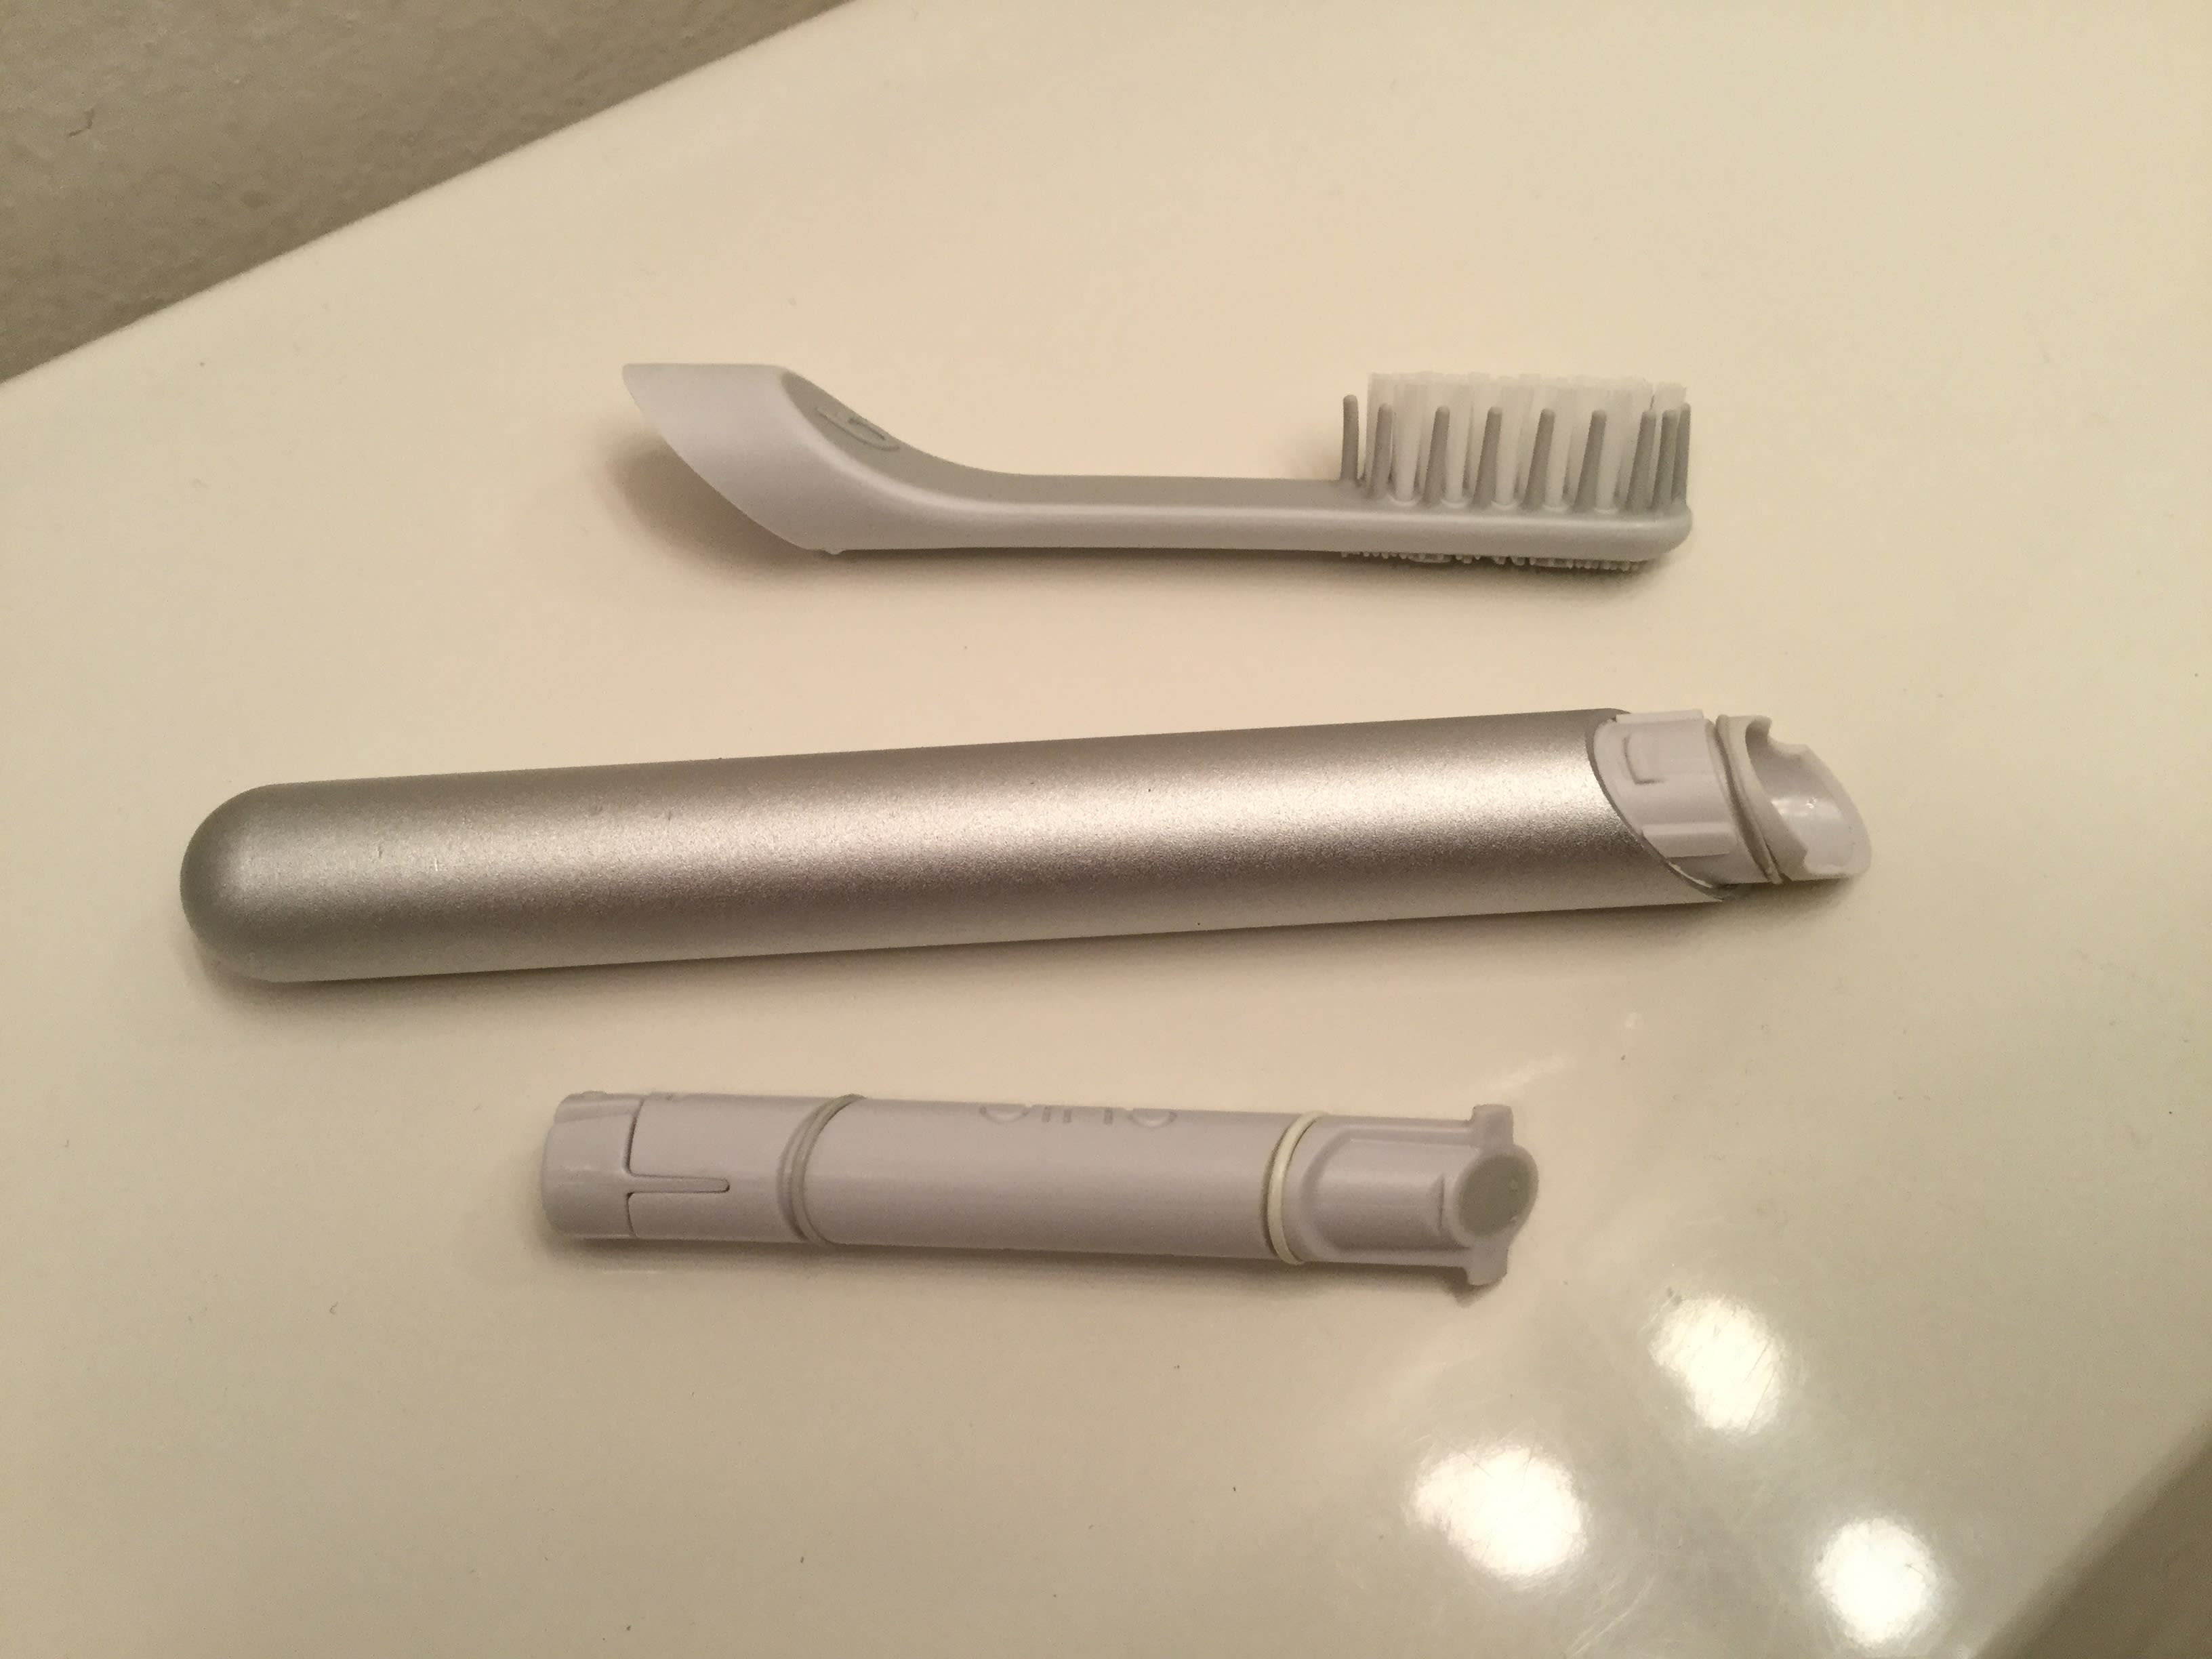 How To Open A Quip Toothbrush